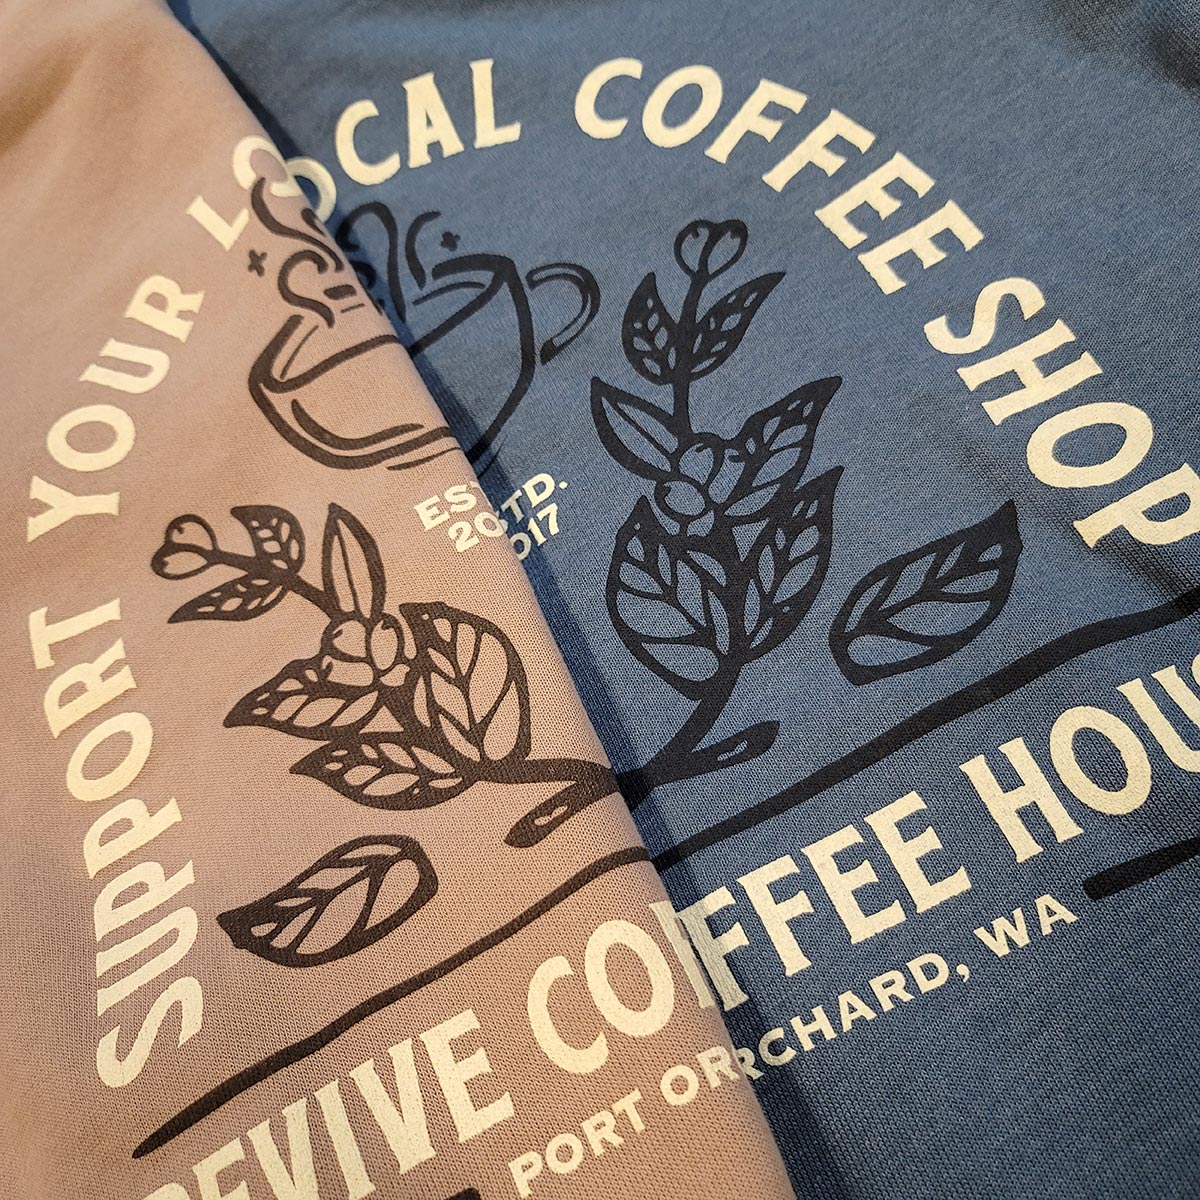 Revive Coffee - Support Your Local Coffee House